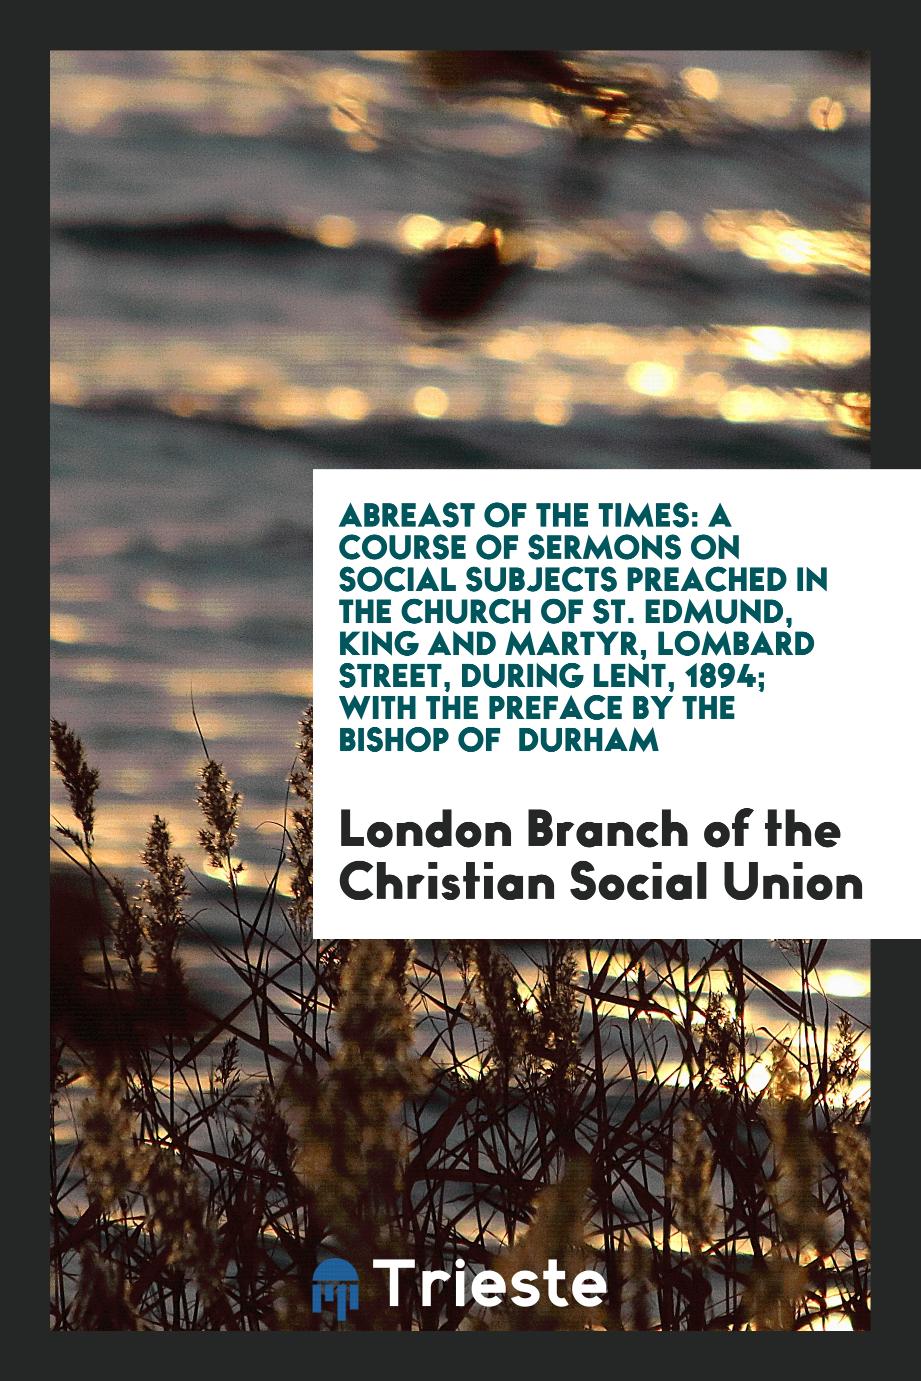 Abreast of the Times: A Course of Sermons on Social Subjects Preached in the Church of St. Edmund, King and Martyr, Lombard Street, During Lent, 1894; With the Preface by the Bishop of Durham